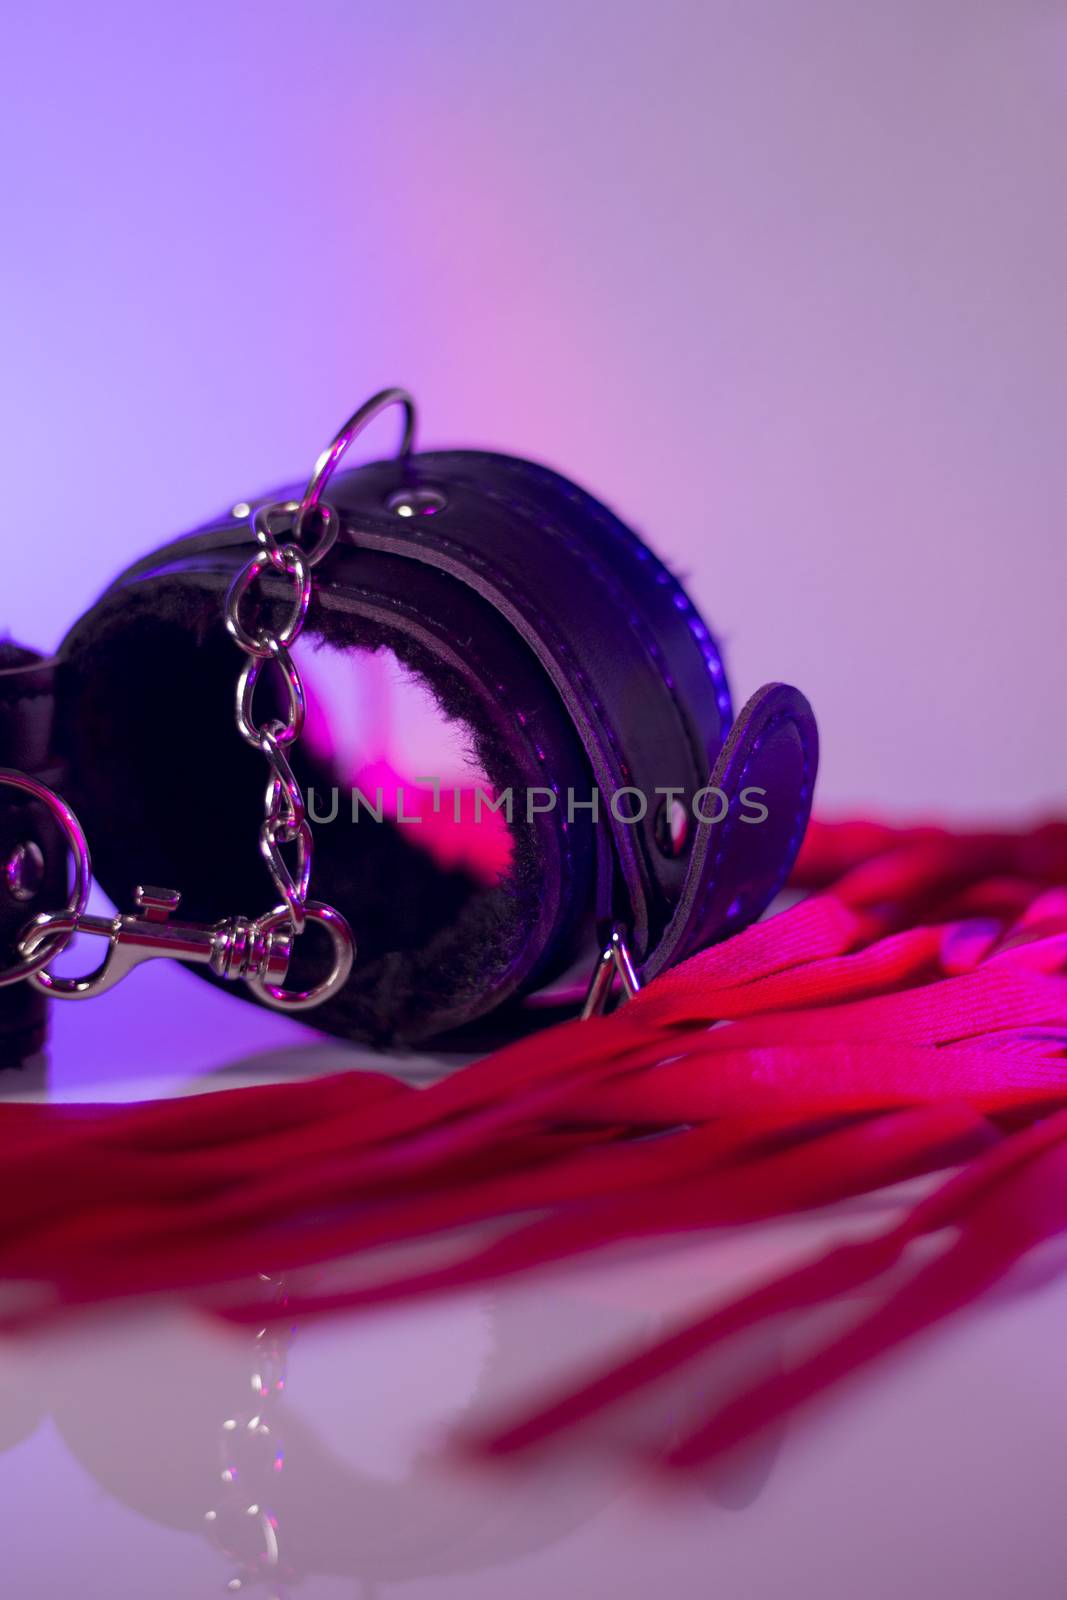 Leather cuffs for hands and legs for erotic games by GemaIbarra